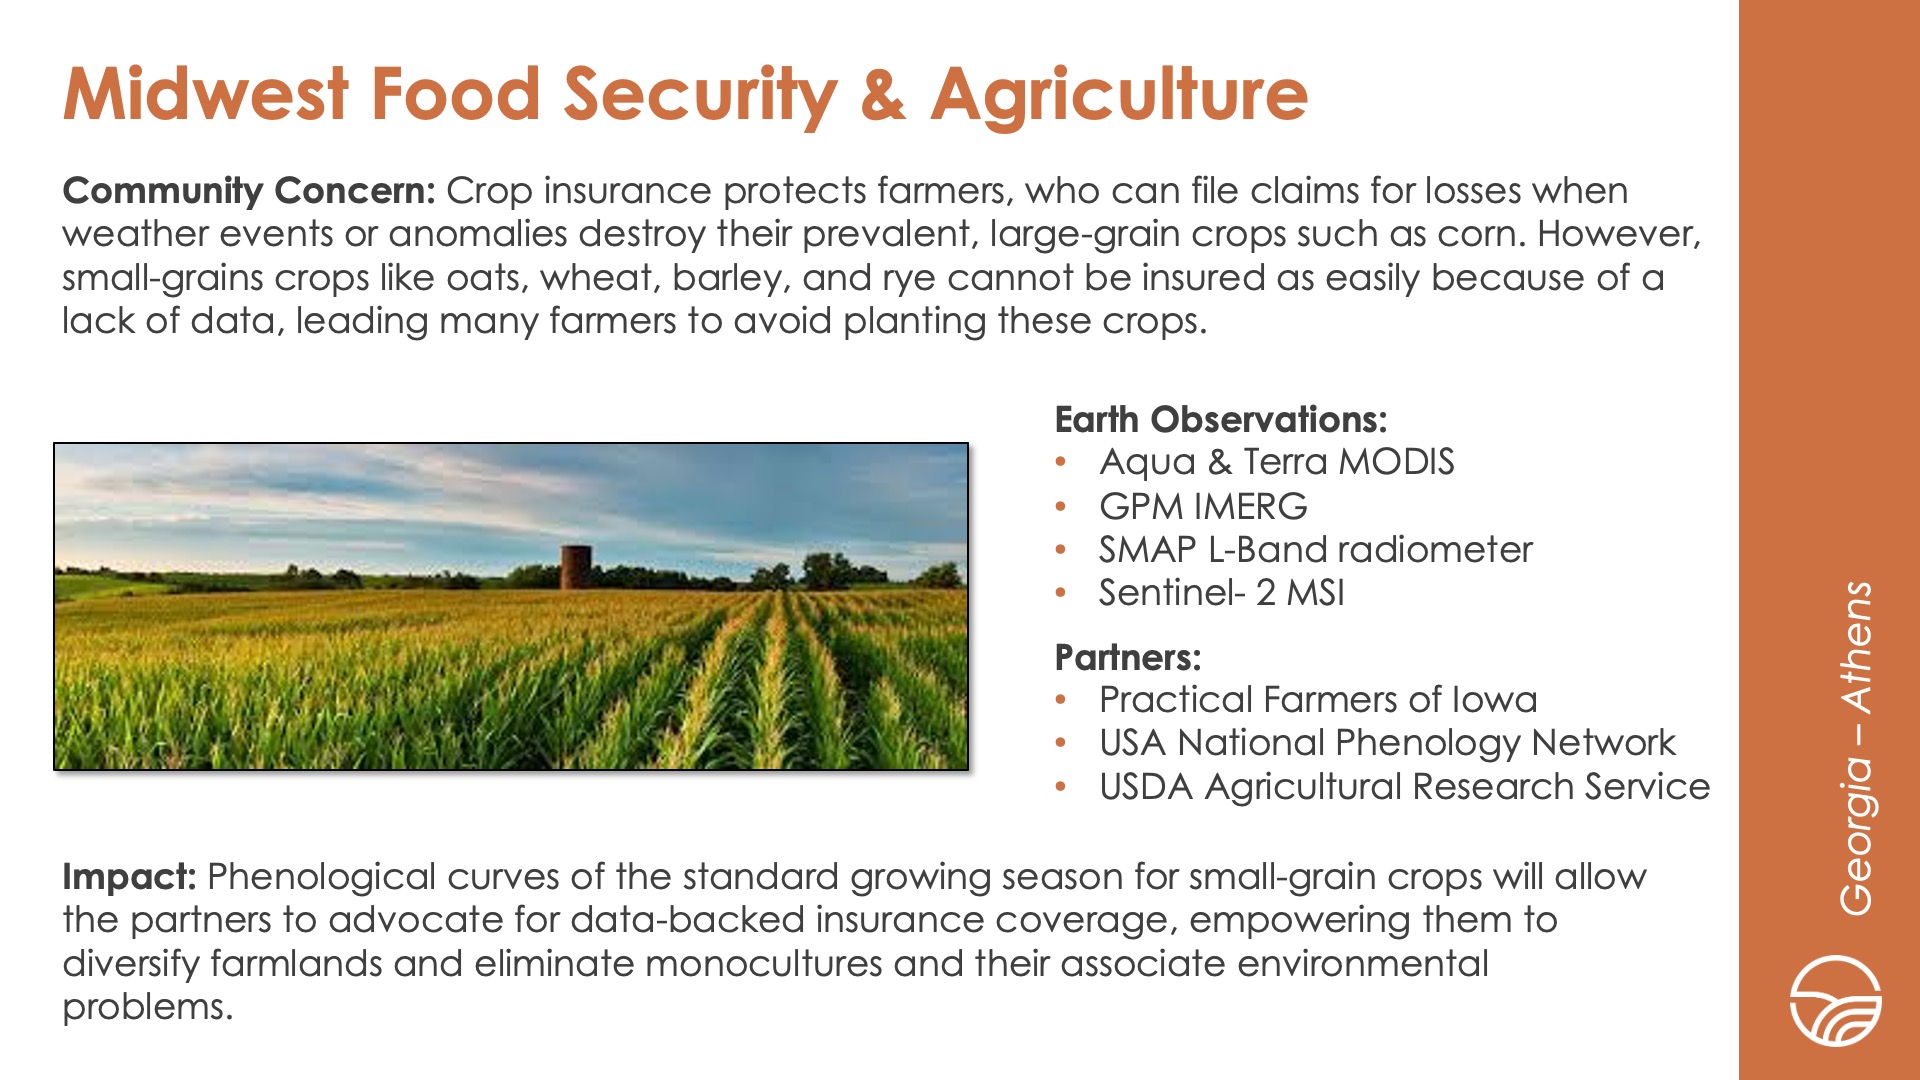 Slide title: Midwest Food Security & AgricultureDEVELOP Node: Georgia - AthensCommunity Concern: Crop insurance protects farmers, who can file claims for losses when weather events or anomalies destroy their prevalent, large-grain crops such as corn. However, small-grains crops like oats, wheat, barley, and rye cannot be insured as easily because of a lack of data, leading many farmers to avoid planting these crops.Impact: Phenological curves of the standard growing season for small-grain crops will allow the partners to advocate for data-backed insurance coverage, empowering them to diversify farmlands and eliminate monocultures and their associate environmental problems.Partners: Practical Farmers of Iowa, USA National Phenology Network, USDA Agricultural Research ServiceEarth Observations: Aqua & Terra MODIS, GPM IMERG, SMAP L-Band radiometer, Sentinel- 2 MSI